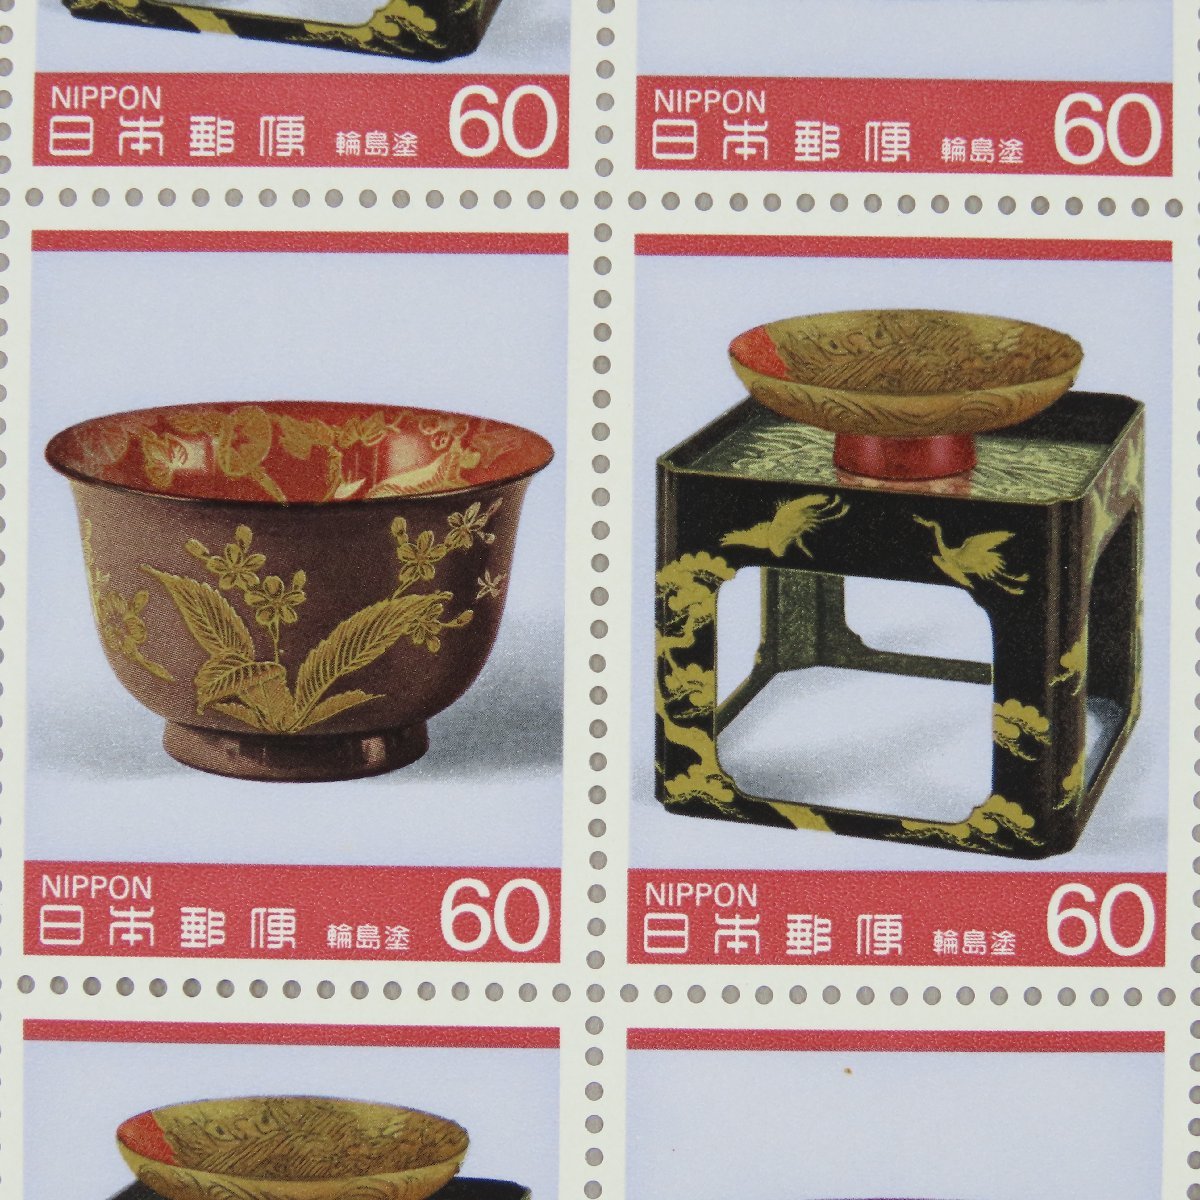 [ stamp 0833] traditional craft goods series no. 6 compilation wheel island paint Showa era 60 year,1985 year issue lacquer ware bowl multi-tiered food box gold-inlaid laquerware lacqering 60 jpy 20 surface 1 seat 